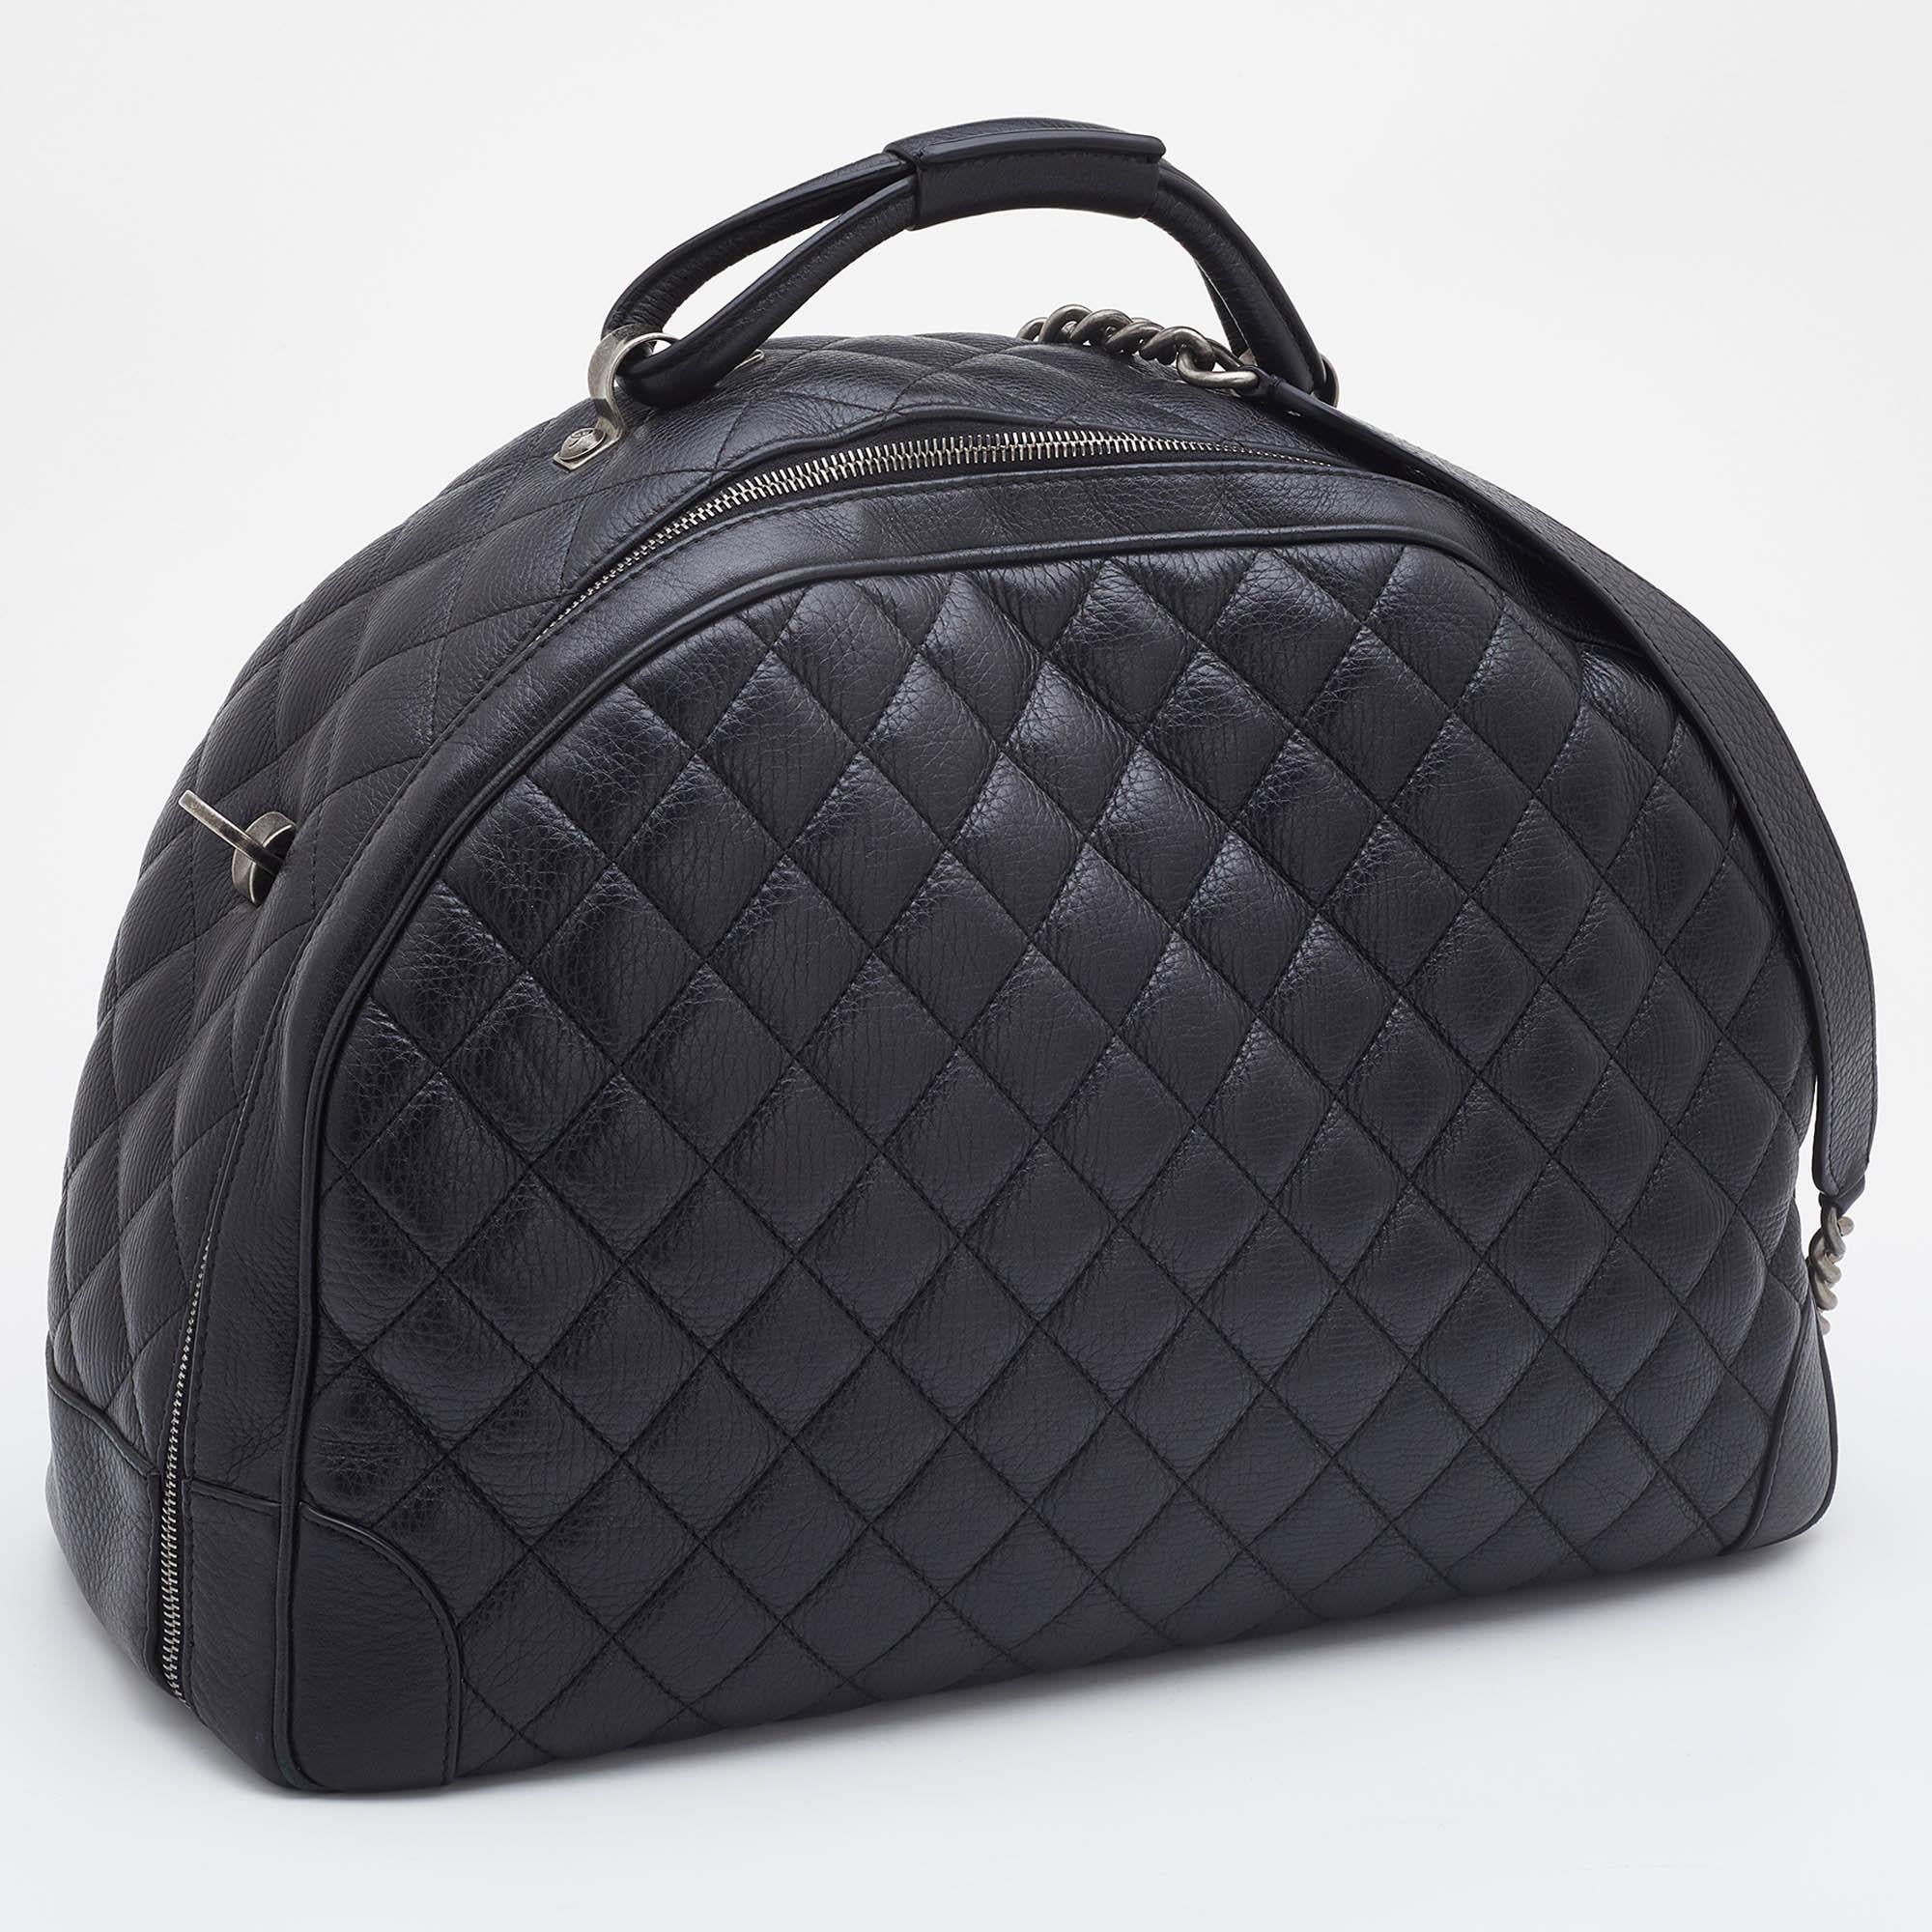 Women's Chanel Black Quilted Leather Large Airlines Round Trip Bag